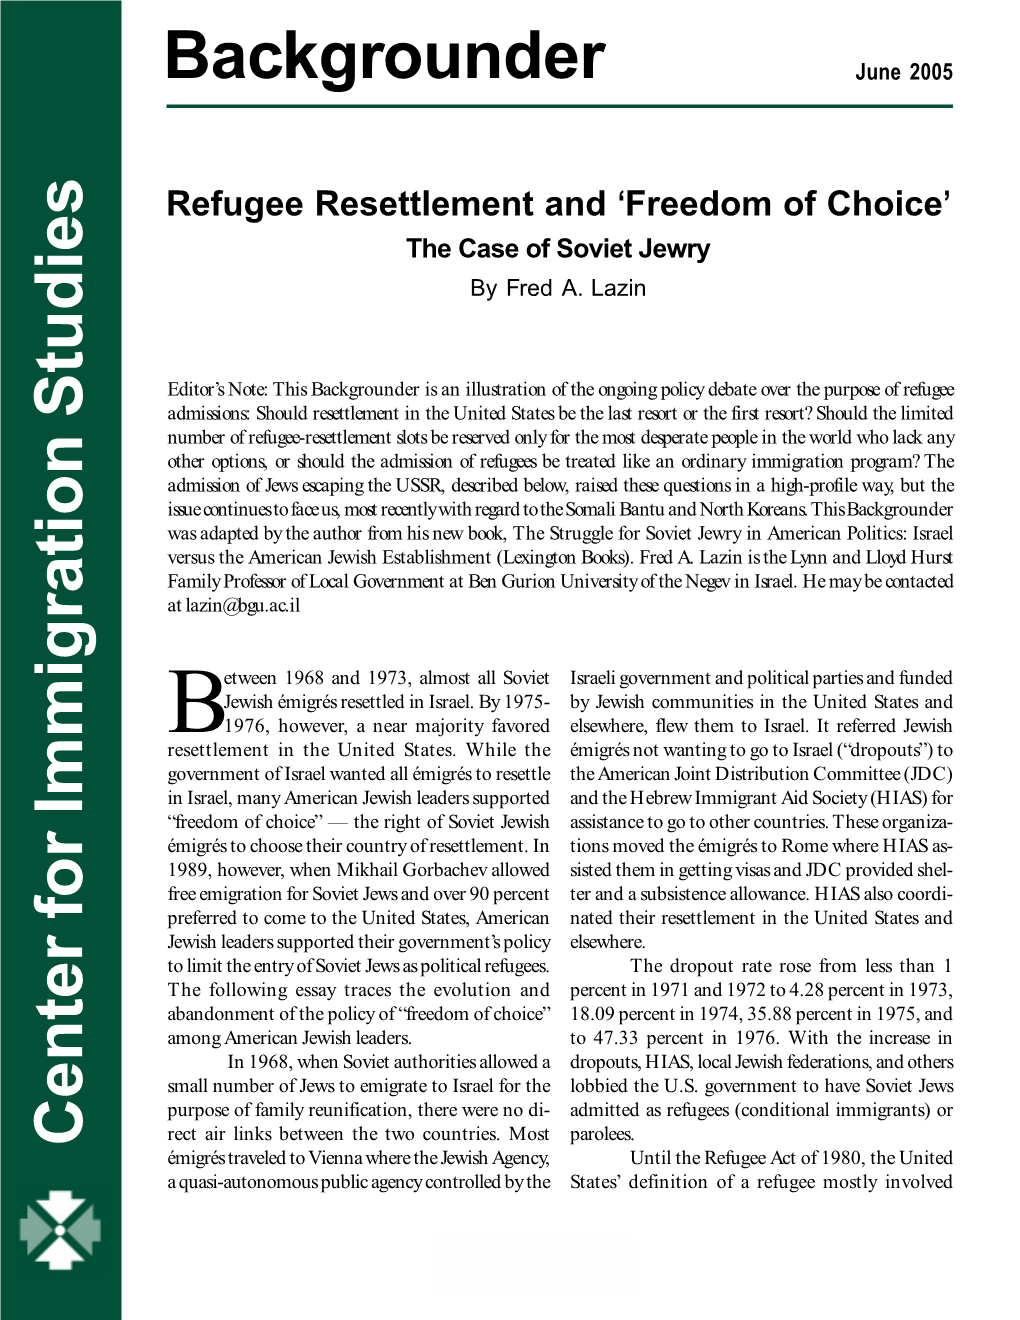 Refugee Resettlement and ‘Freedom of Choice’ the Case of Soviet Jewry by Fred A